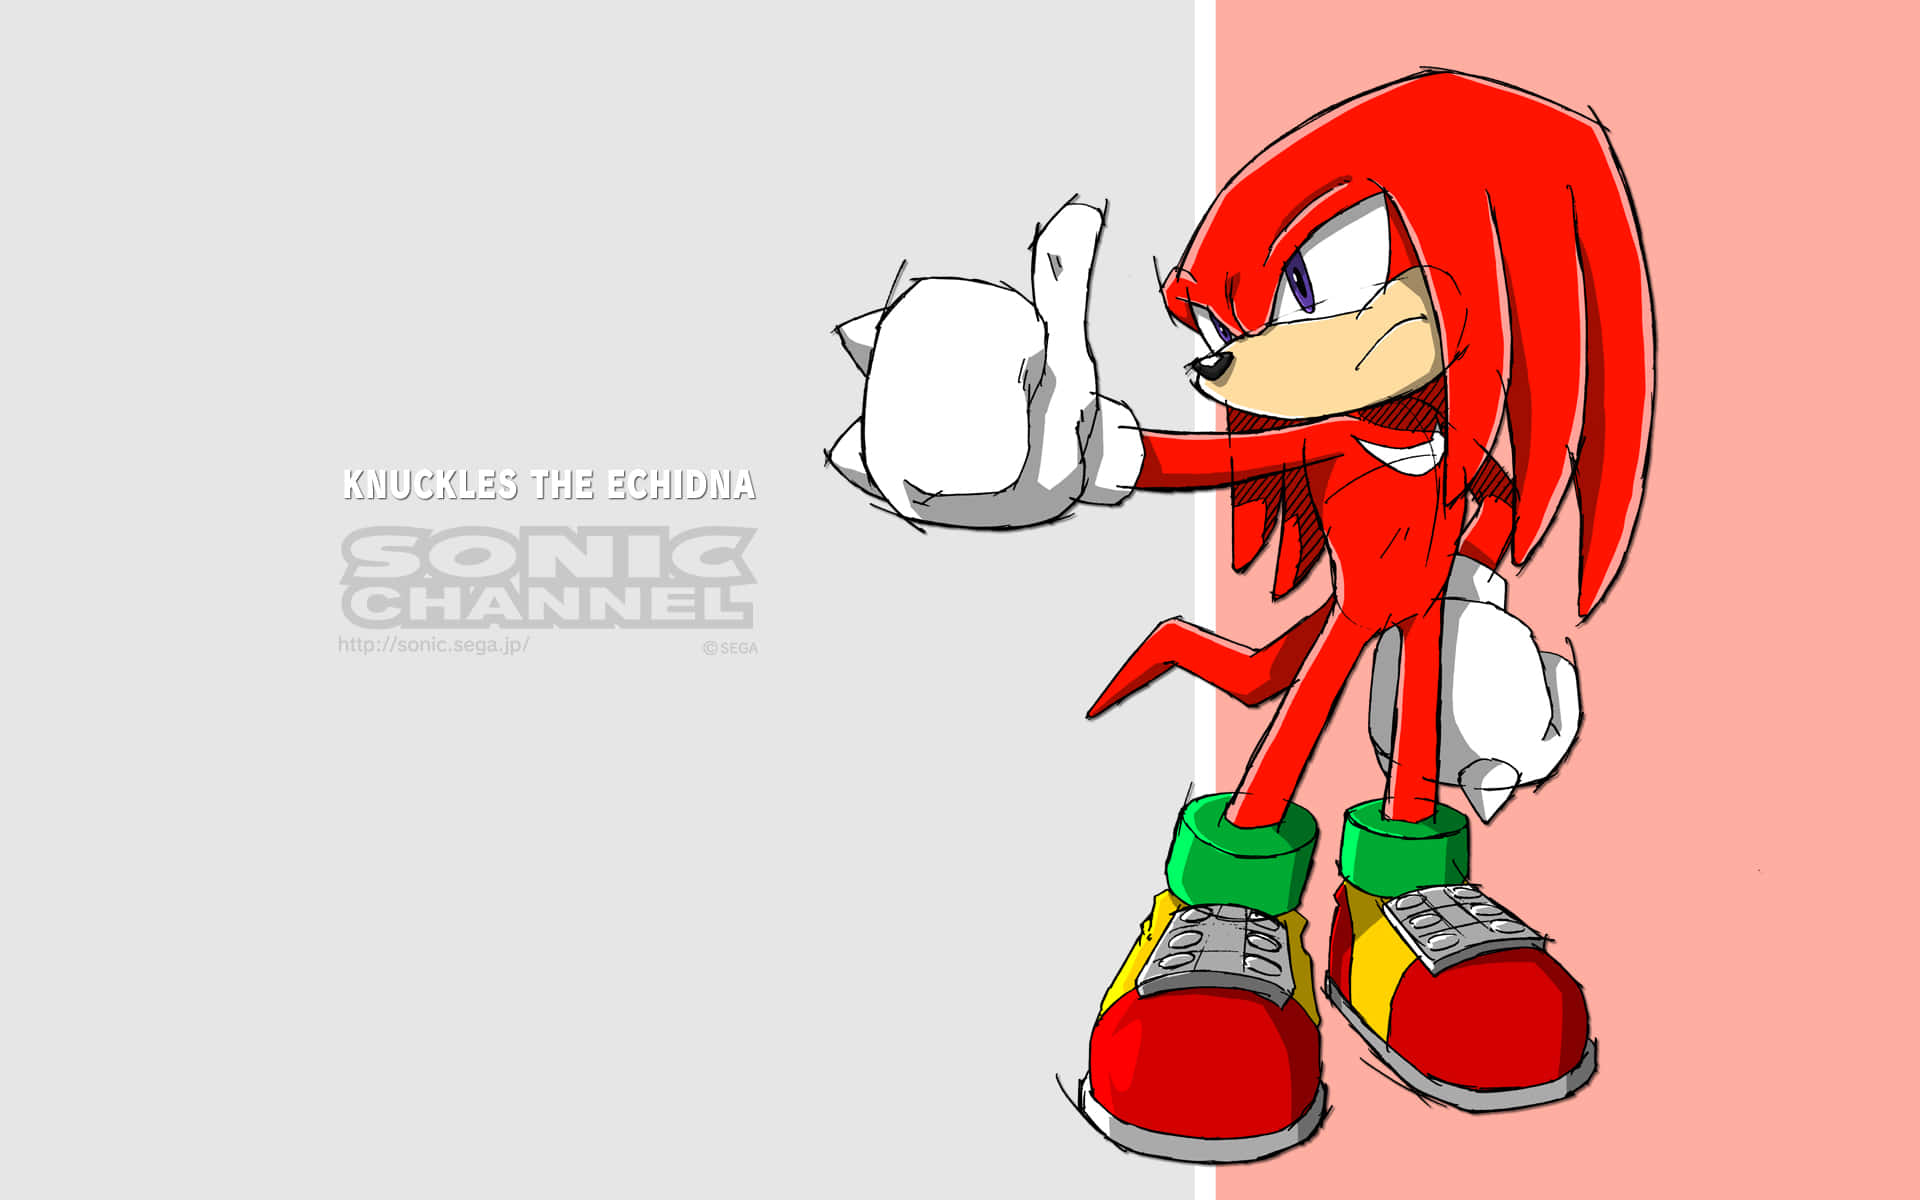 Knuckles the Echidna stands guard against injustice and danger. Wallpaper